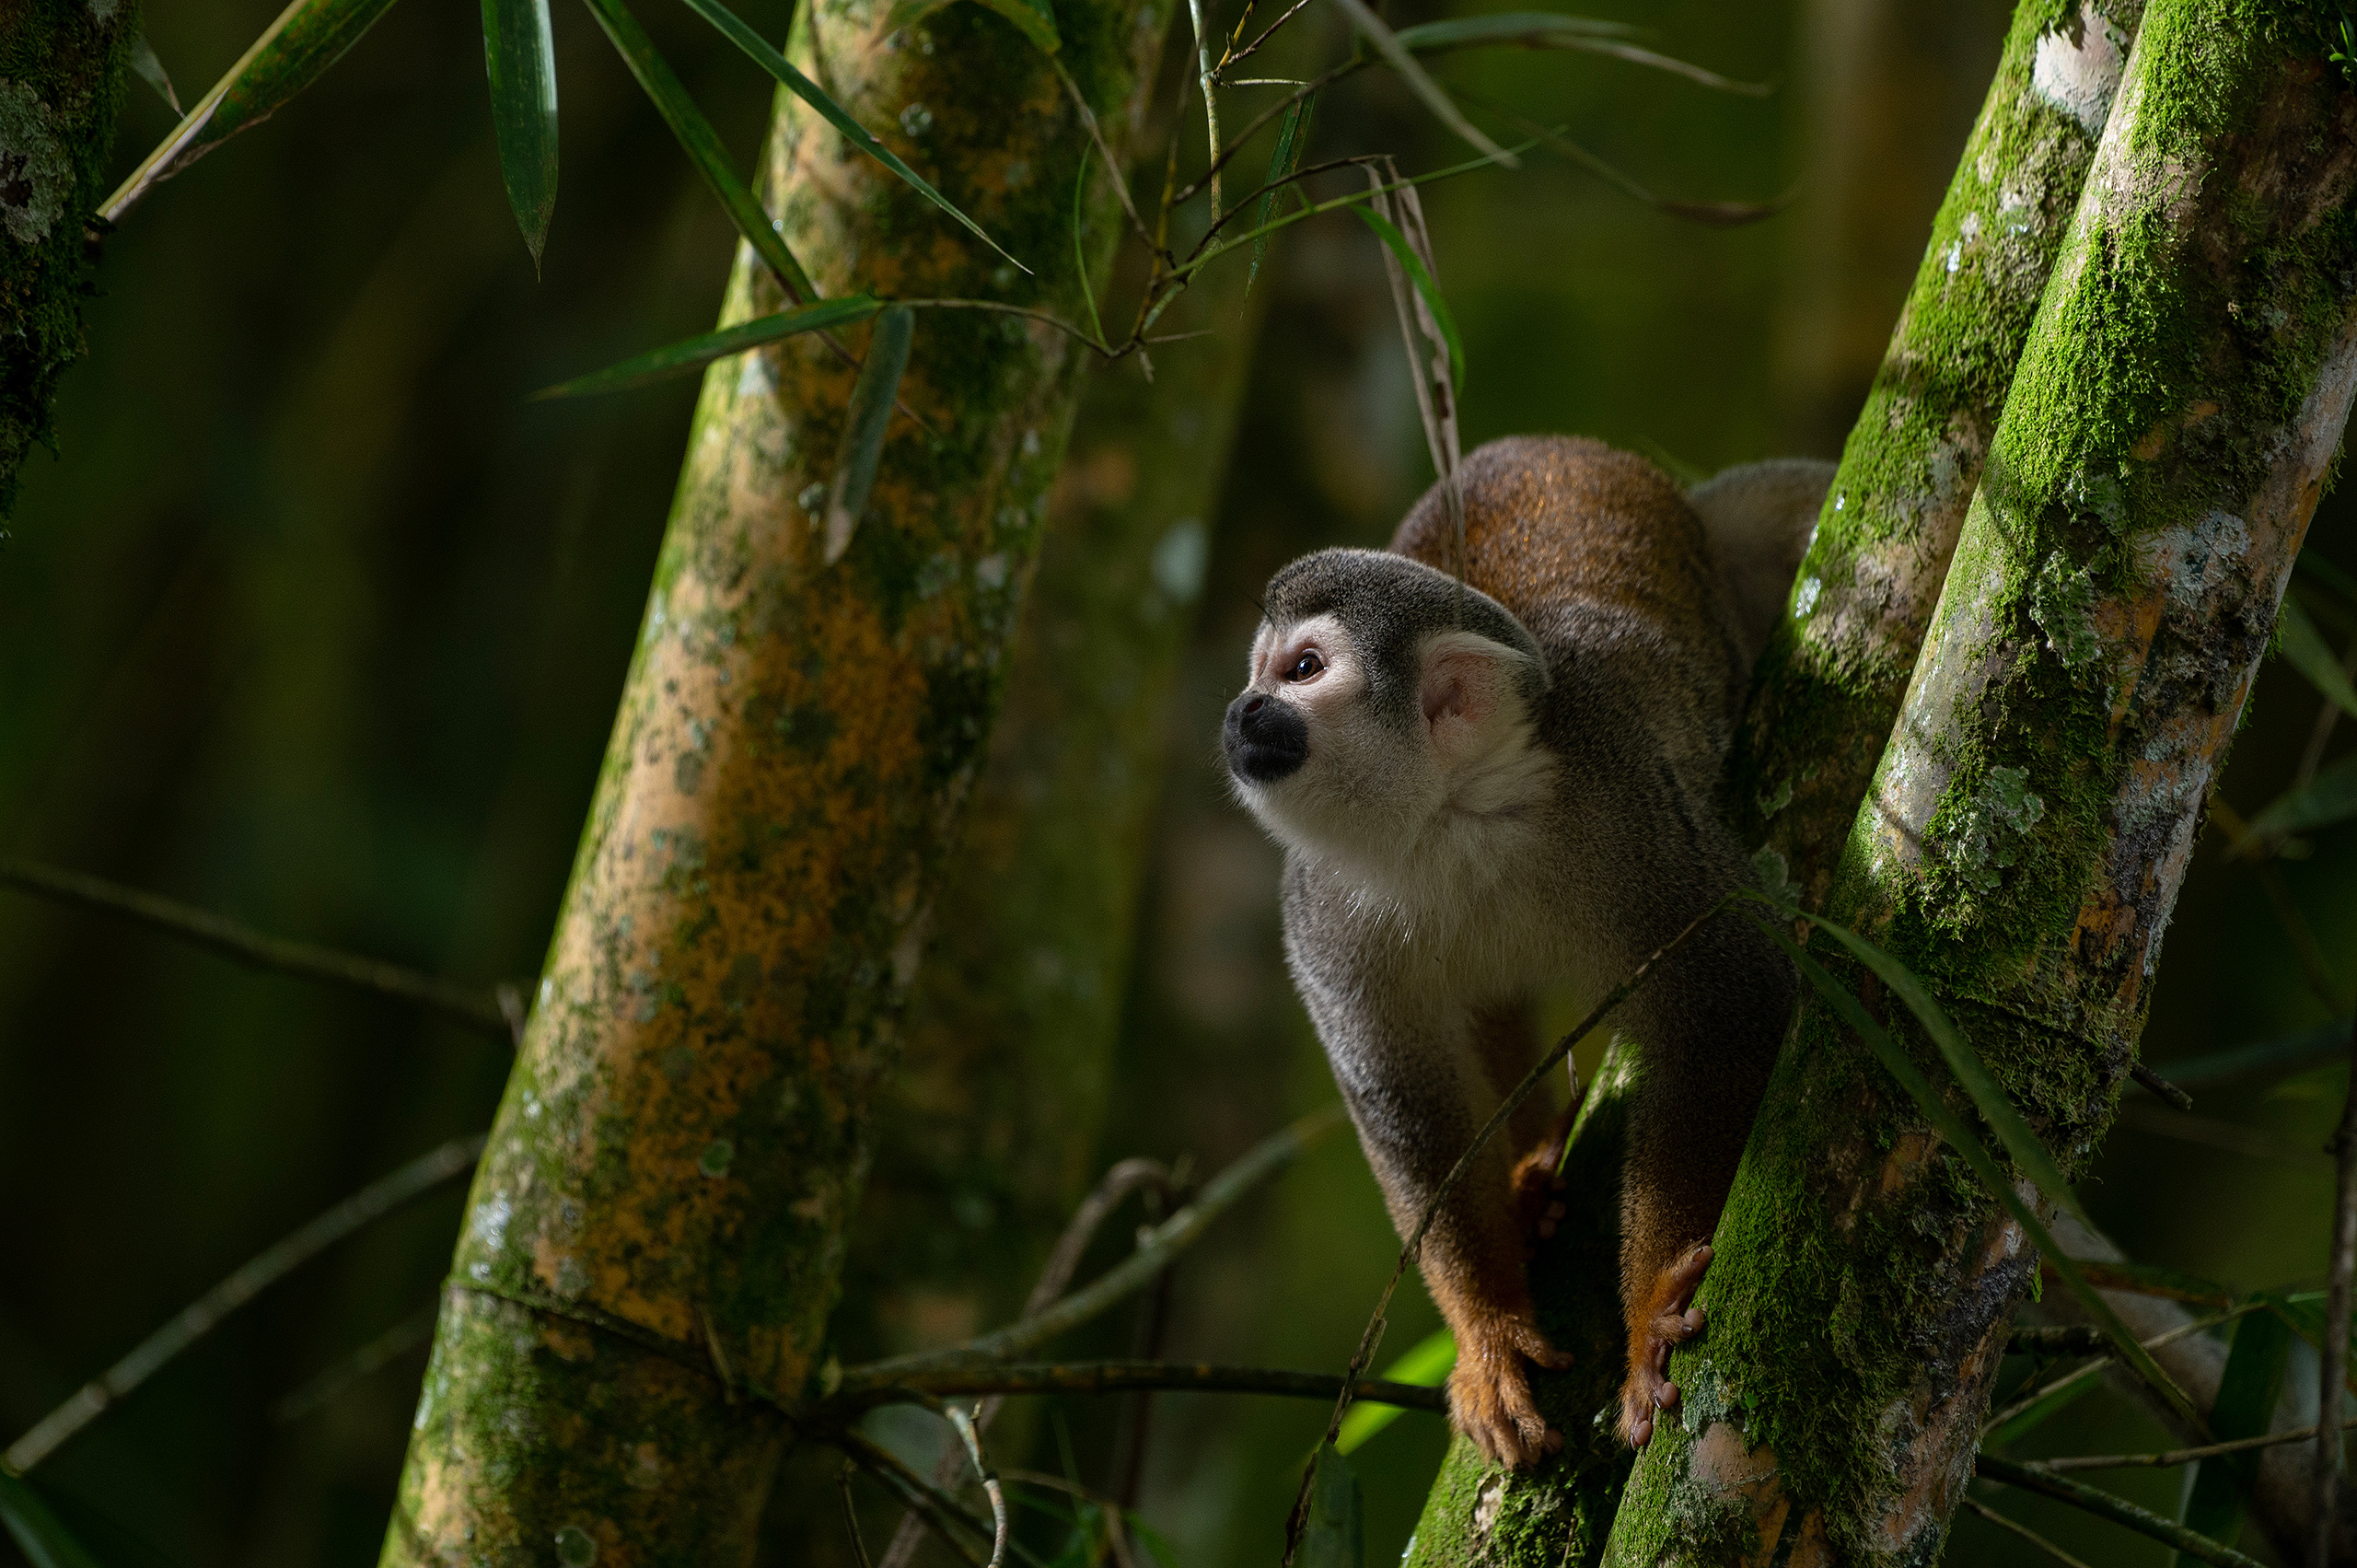 <p>A squirrel monkey in Ecuador&#8217;s Yasuní Biosphere Reserve, one of the most biodiverse places on the planet. A referendum to decide whether oil exploitation in Yasuní should continue or be banned will take place this Sunday, 20 August. (Image: Flor Ruiz / Diálogo Chino)</p>